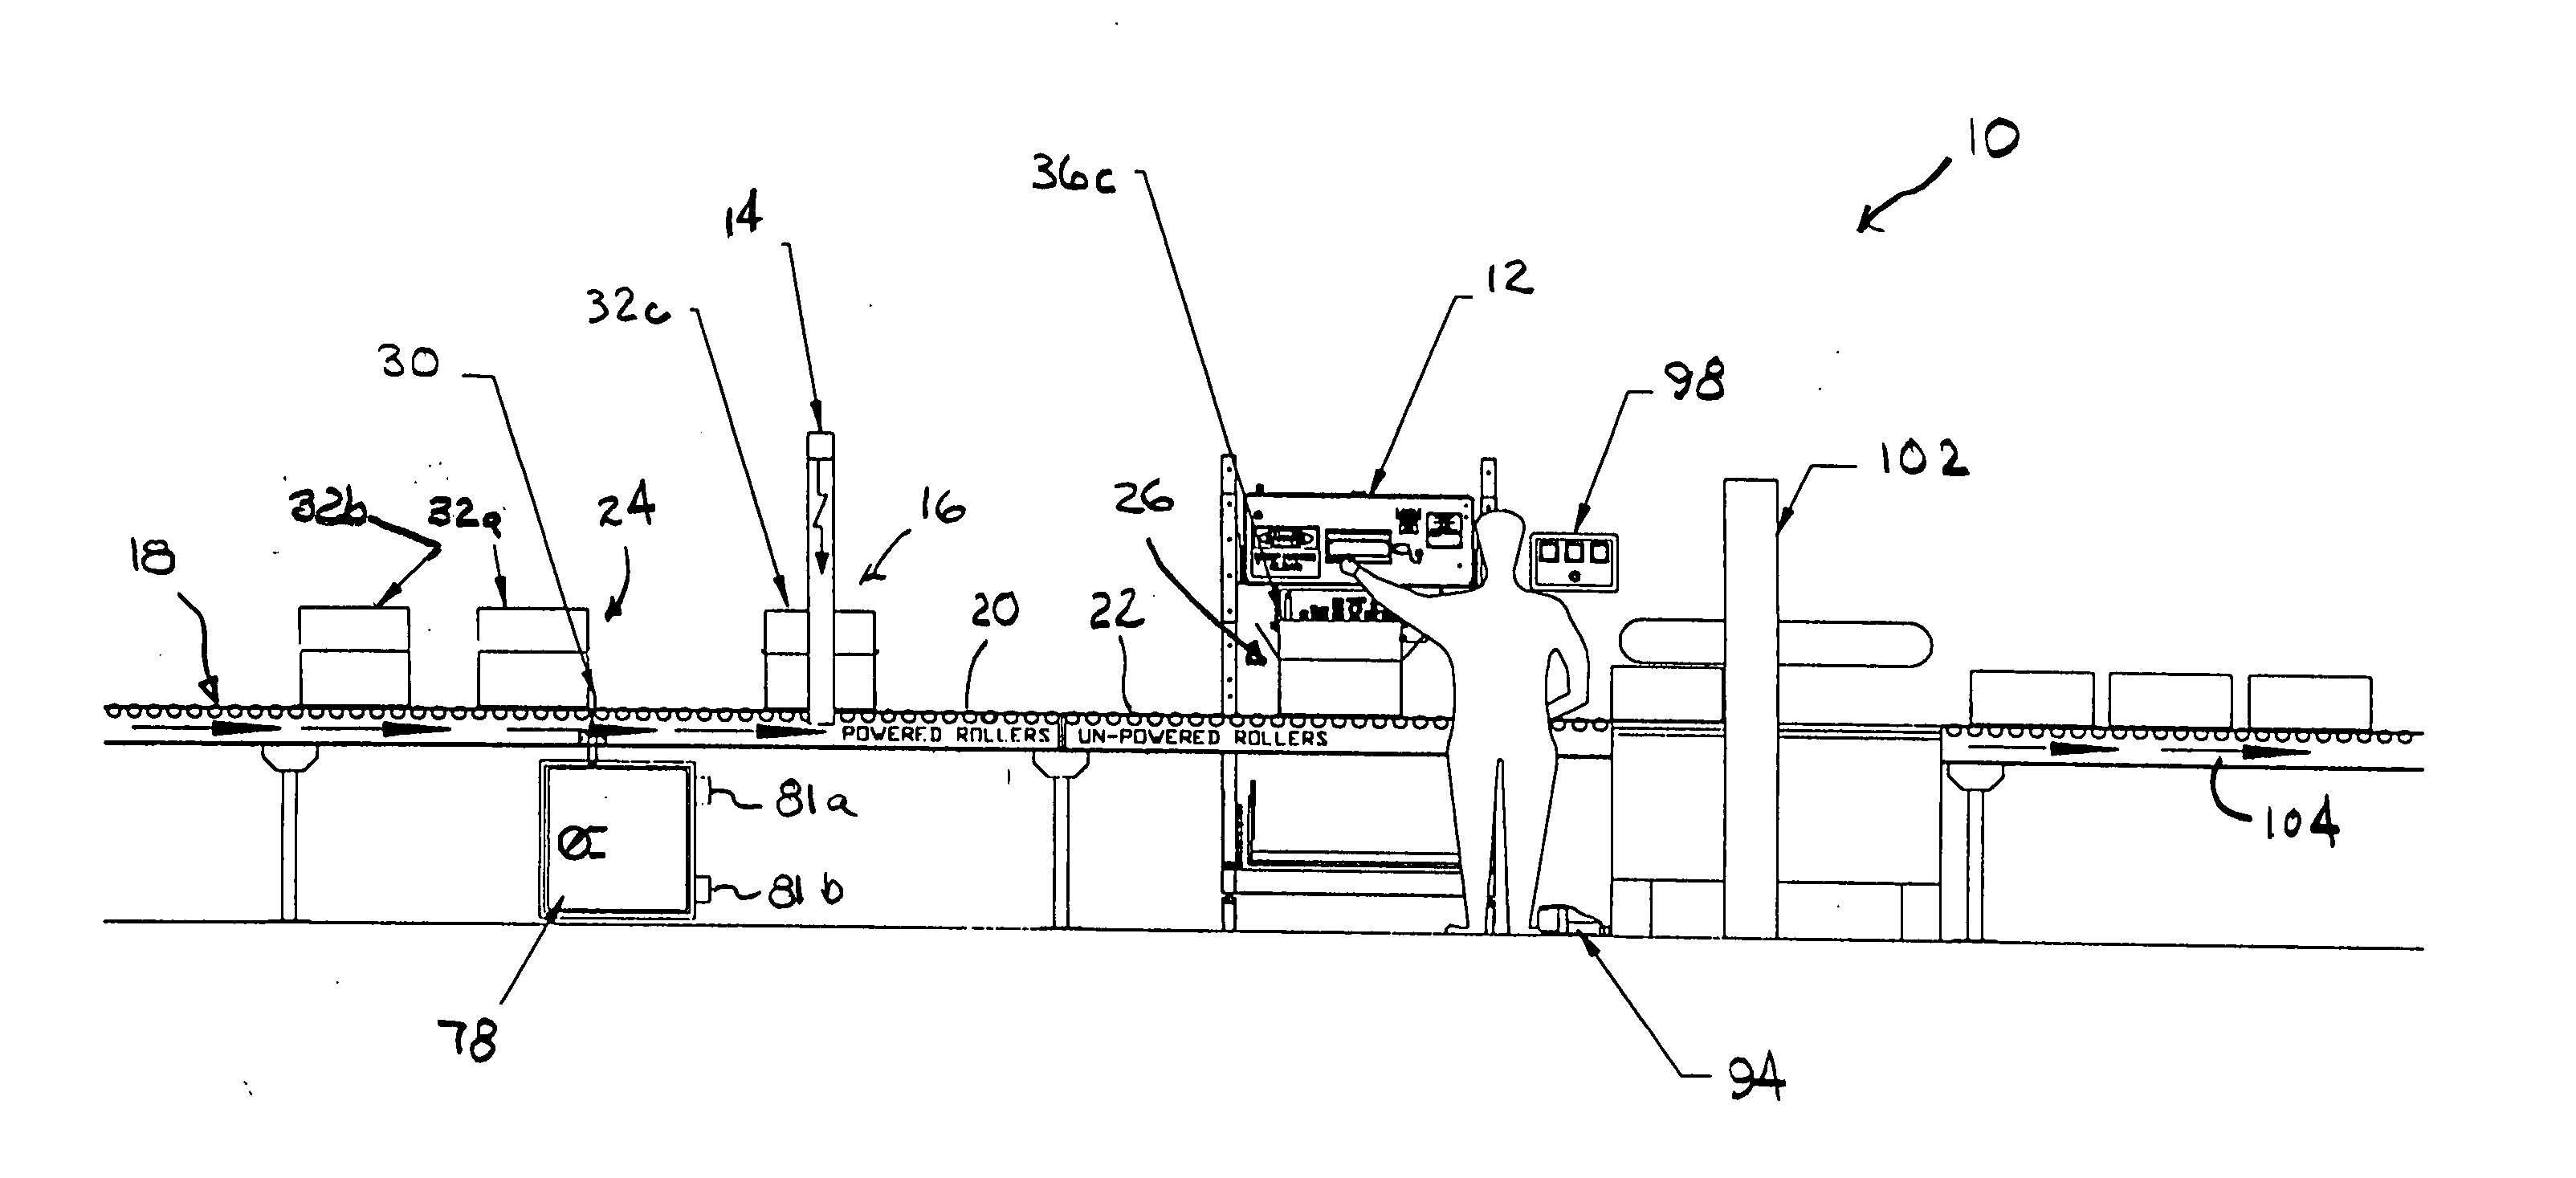 Packaging system with void fill measurement